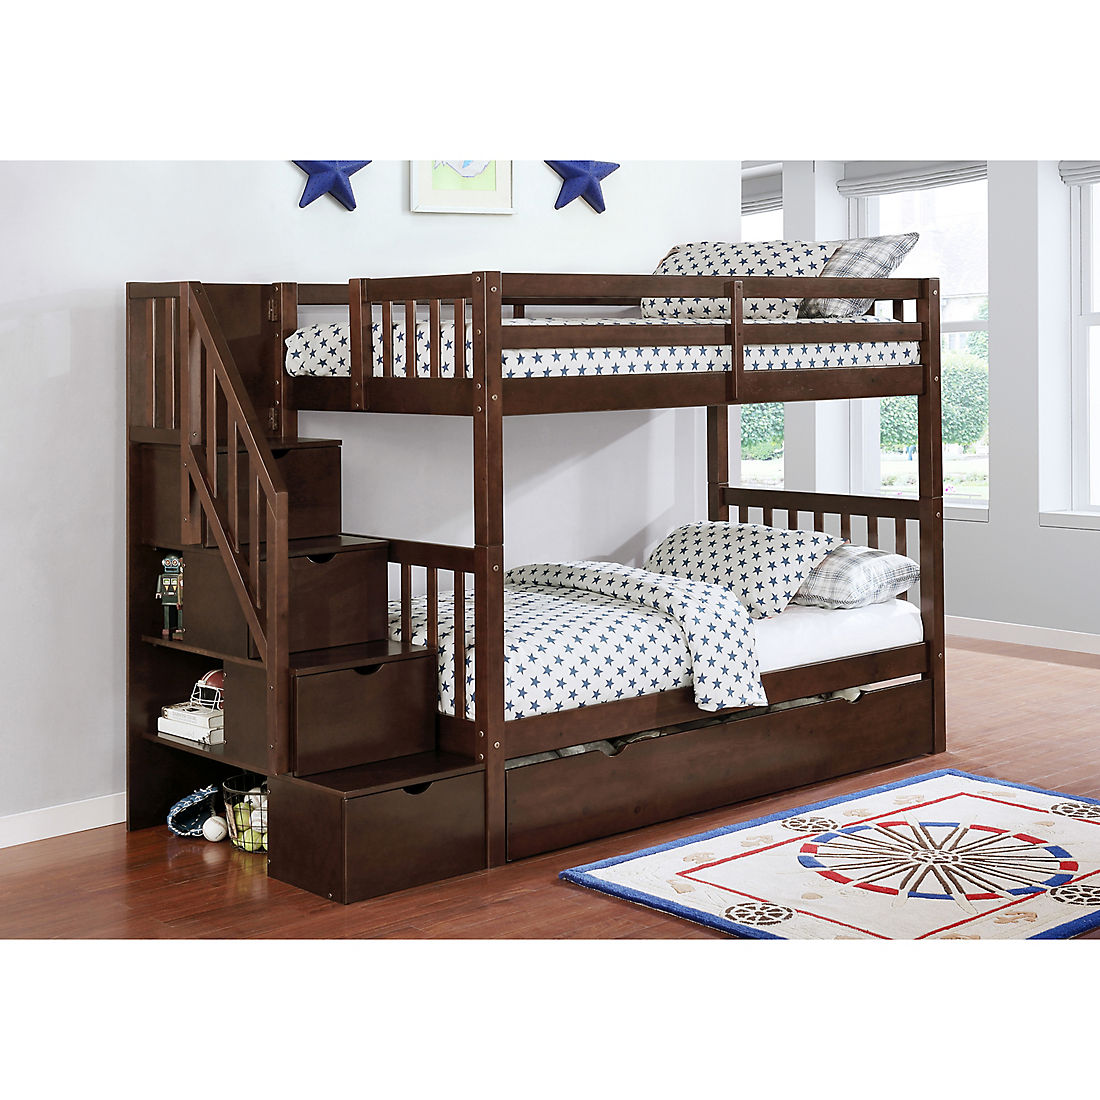 Berkley Jensen Twin Over Stairway, Full On Bunk Beds With Stairs